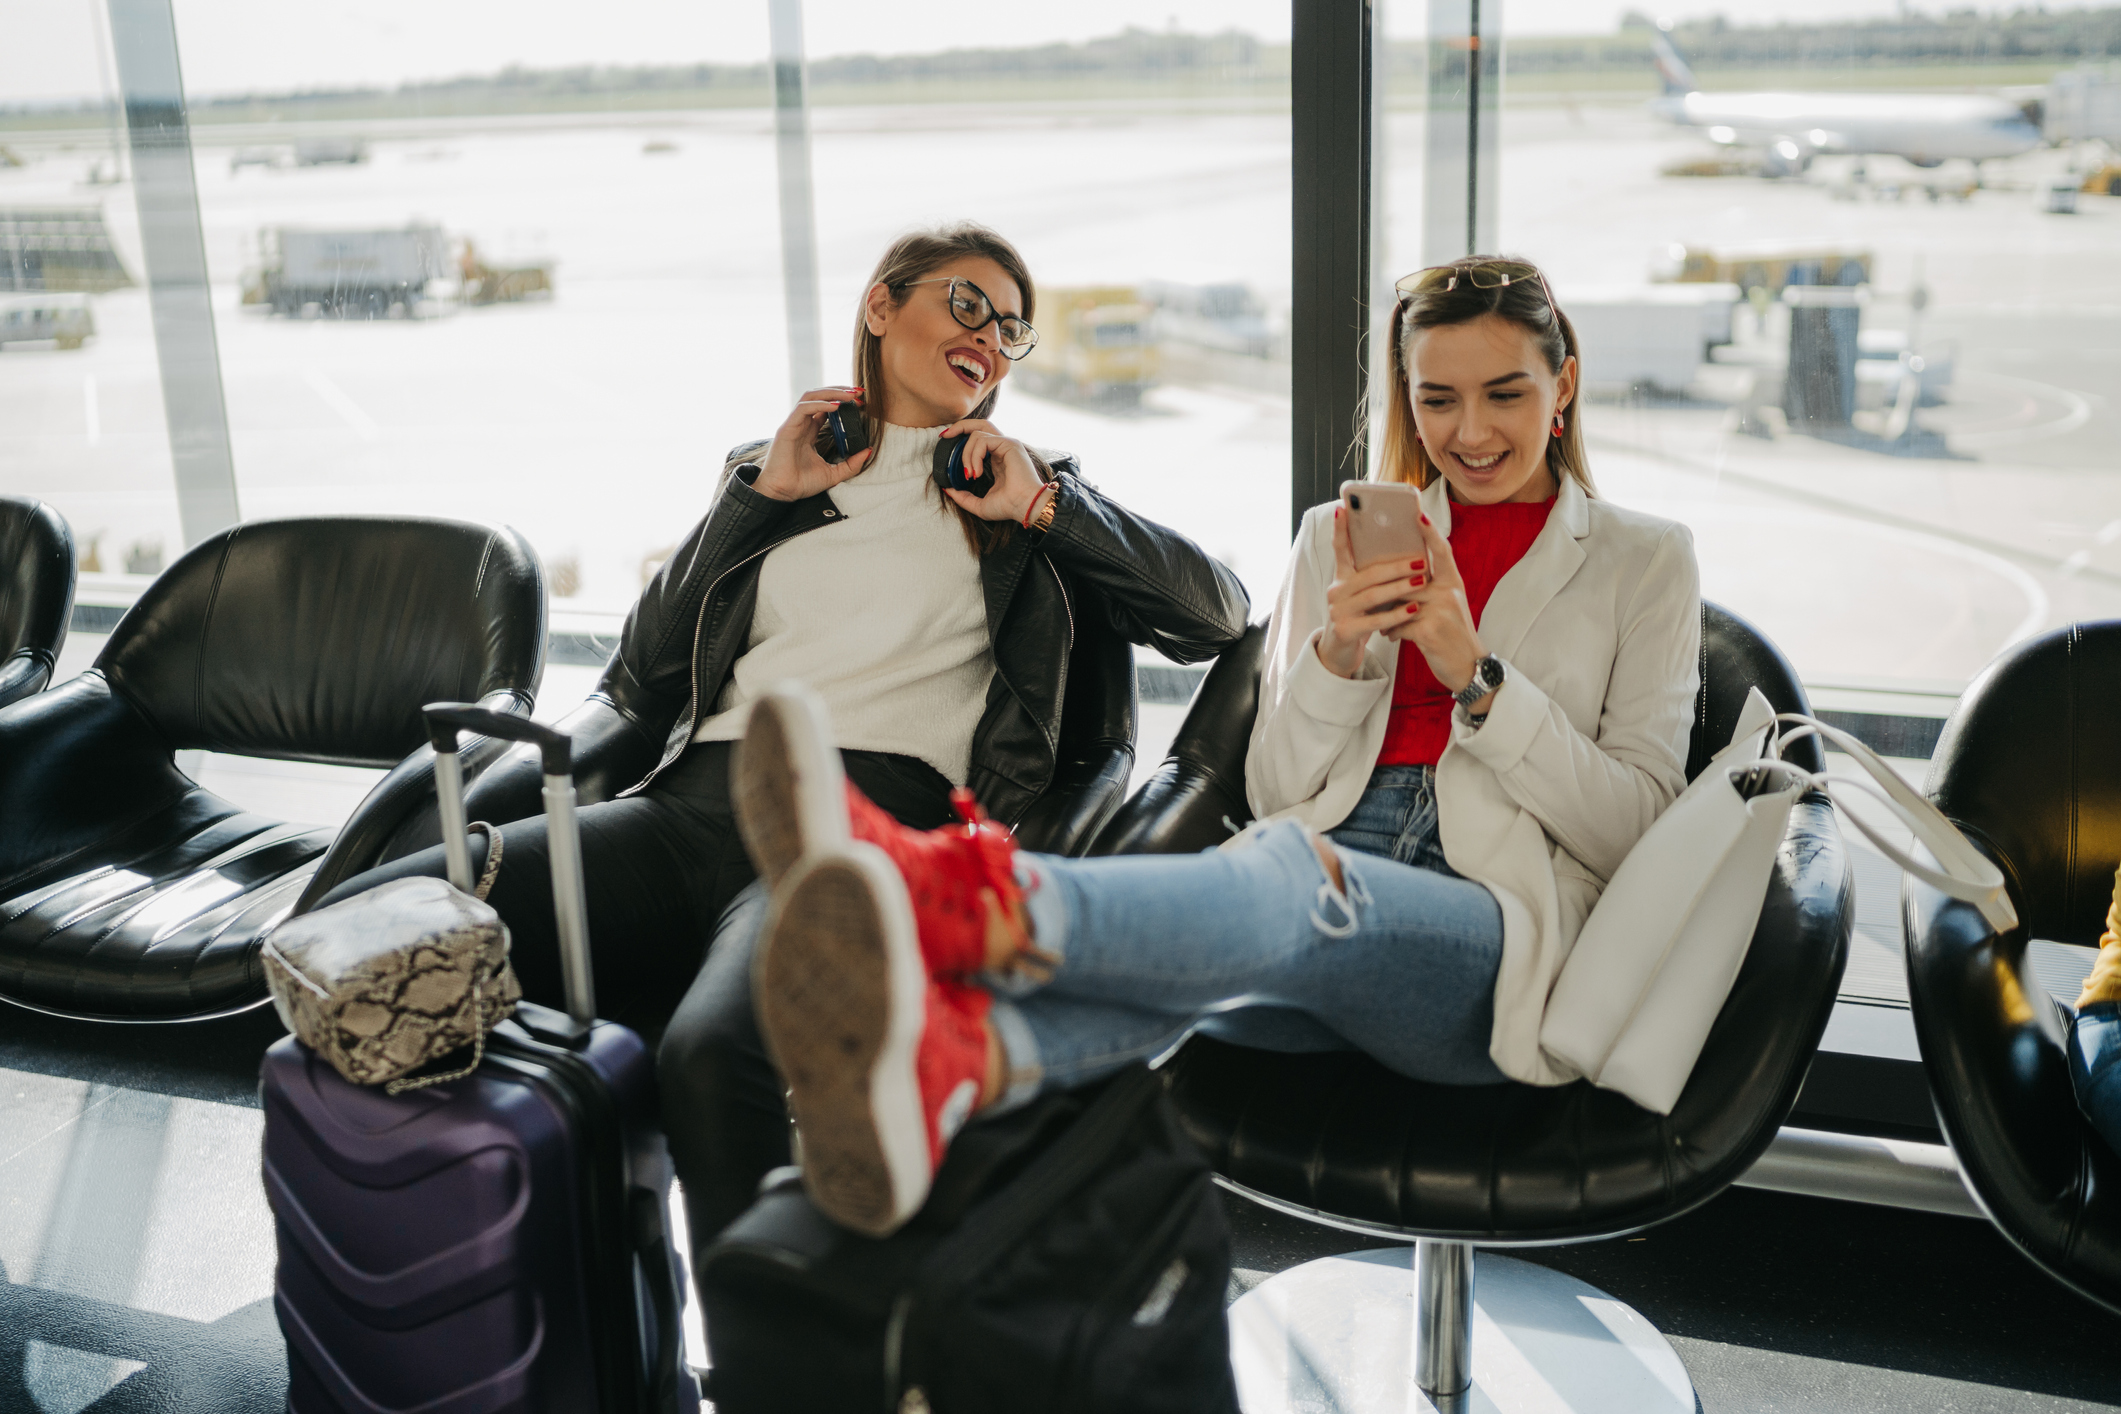 Tips for Making the Most of a Layover